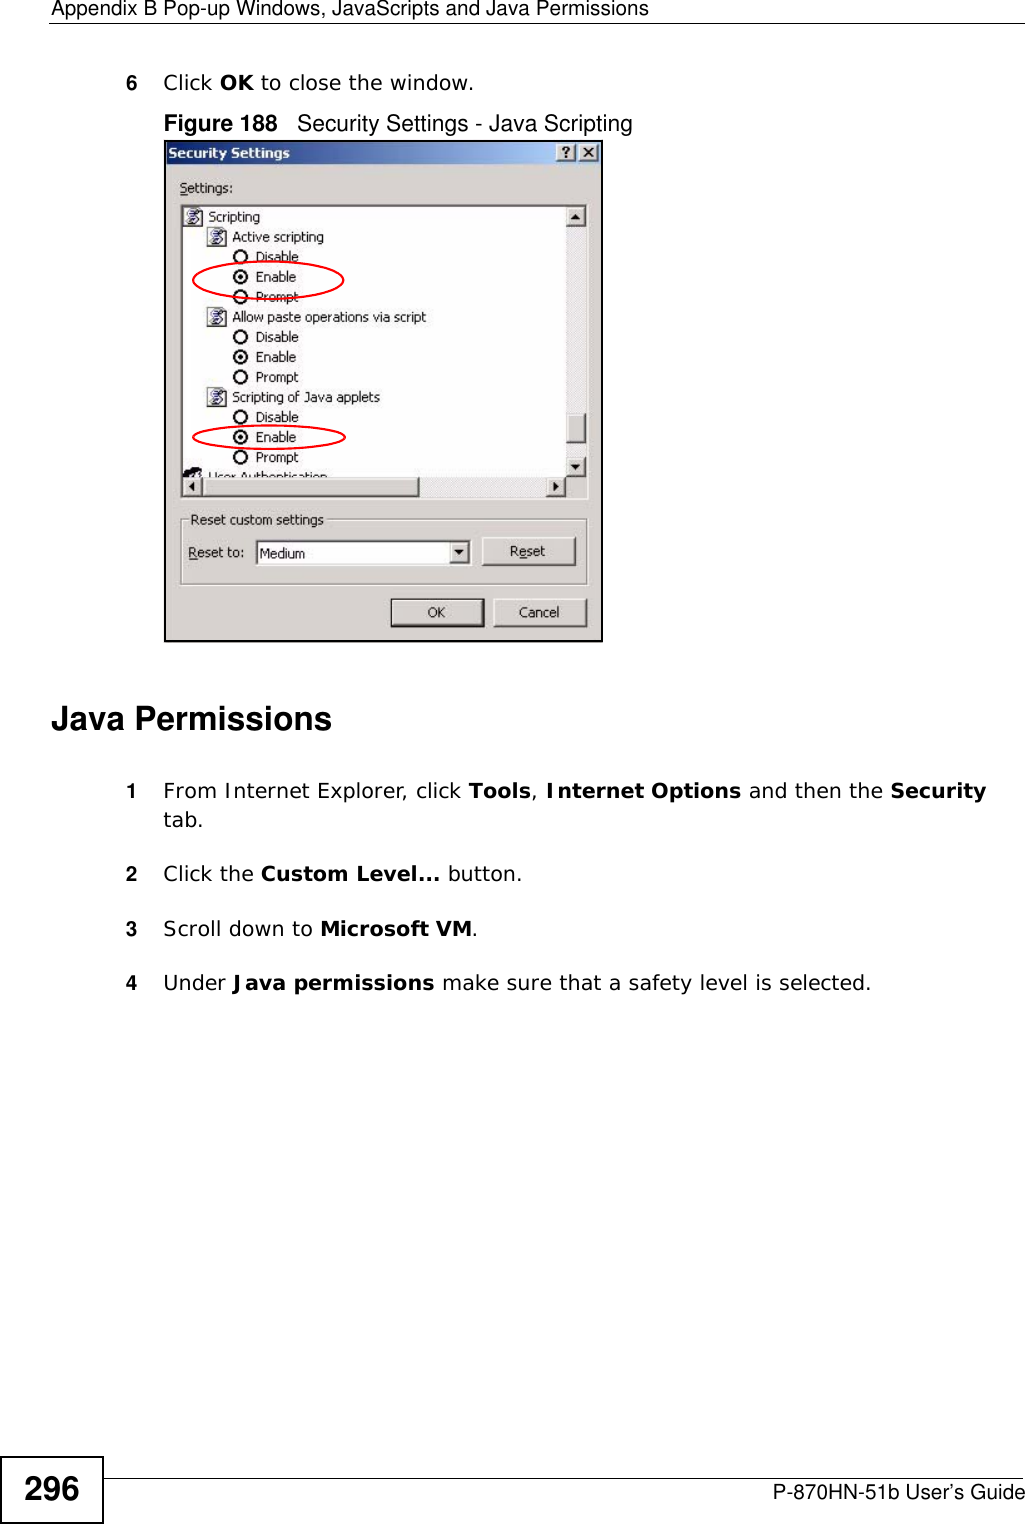 Appendix B Pop-up Windows, JavaScripts and Java PermissionsP-870HN-51b User’s Guide2966Click OK to close the window.Figure 188   Security Settings - Java ScriptingJava Permissions1From Internet Explorer, click Tools, Internet Options and then the Security tab. 2Click the Custom Level... button. 3Scroll down to Microsoft VM. 4Under Java permissions make sure that a safety level is selected.